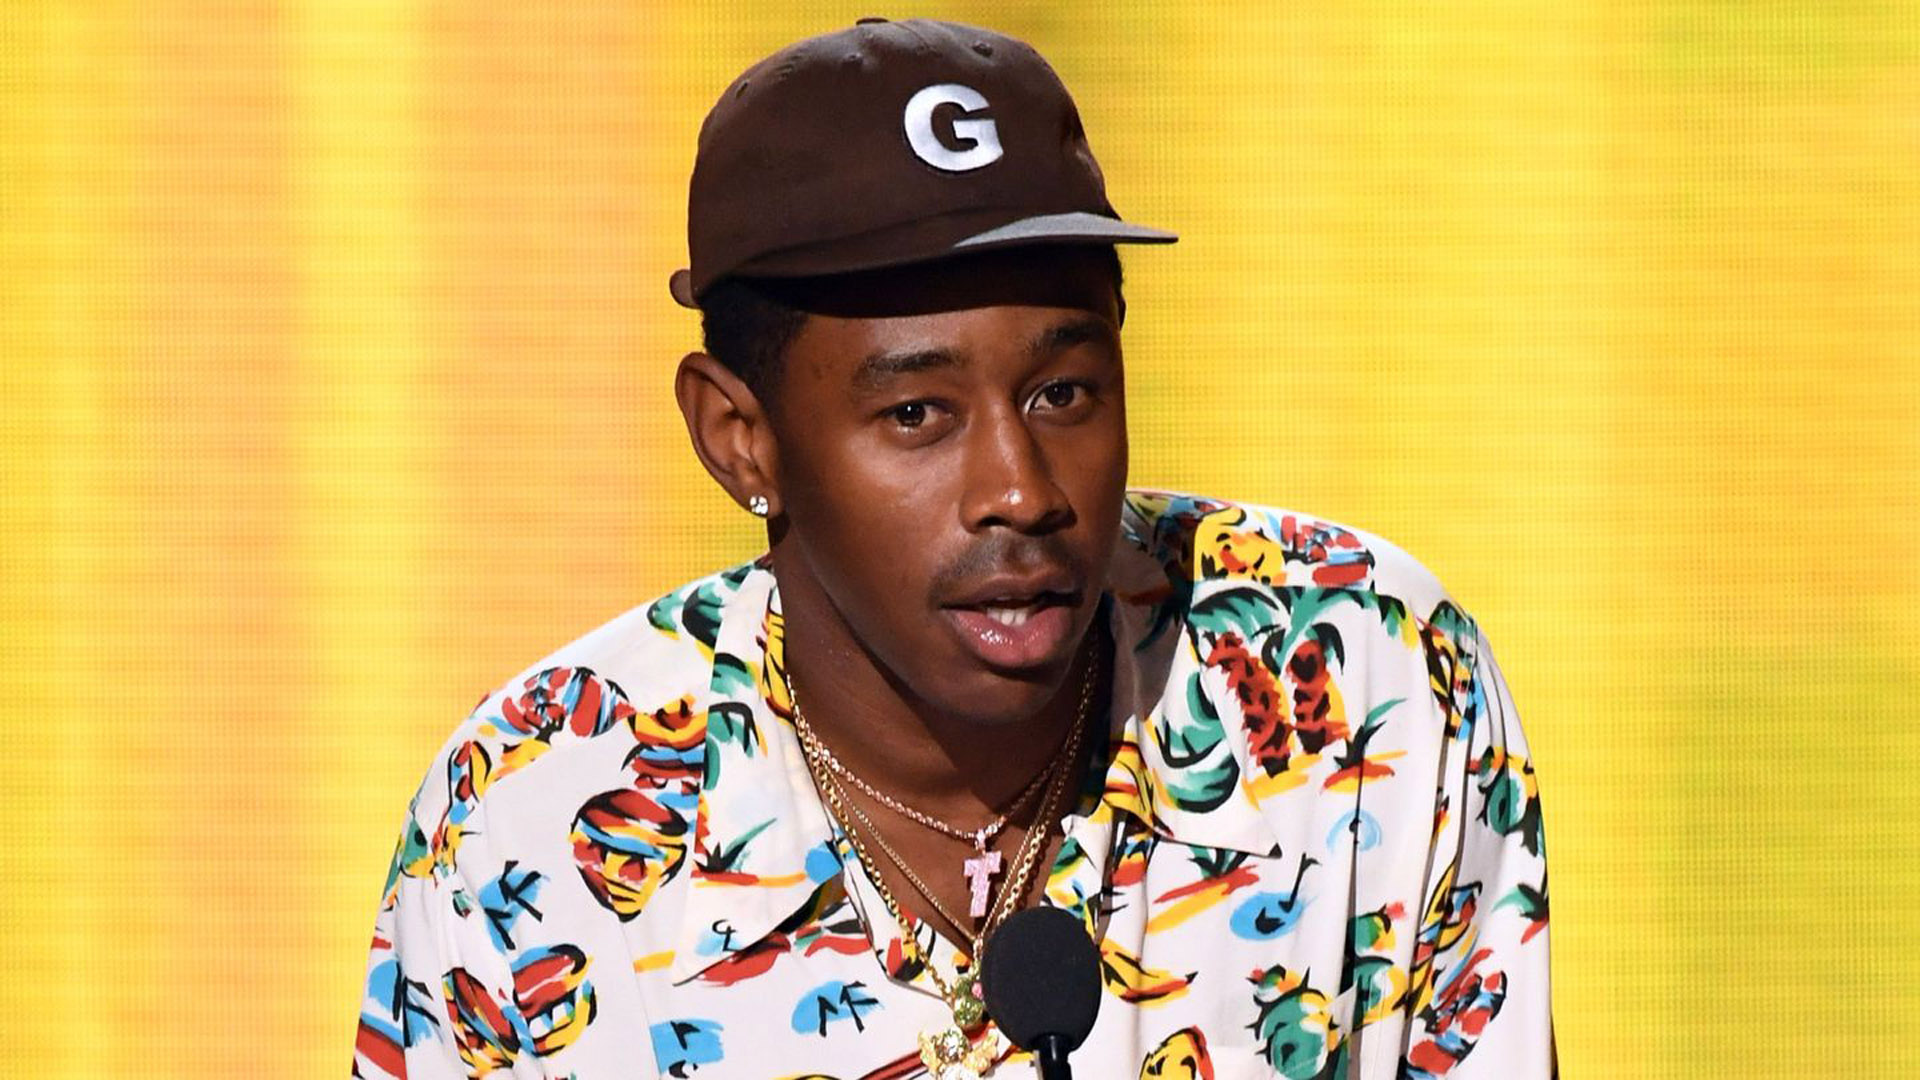 Tyler The Creator Is Wearing Colorful Shirt And Brown Cap Standing In Yellow Wallpaper 2K Tyler The Creator